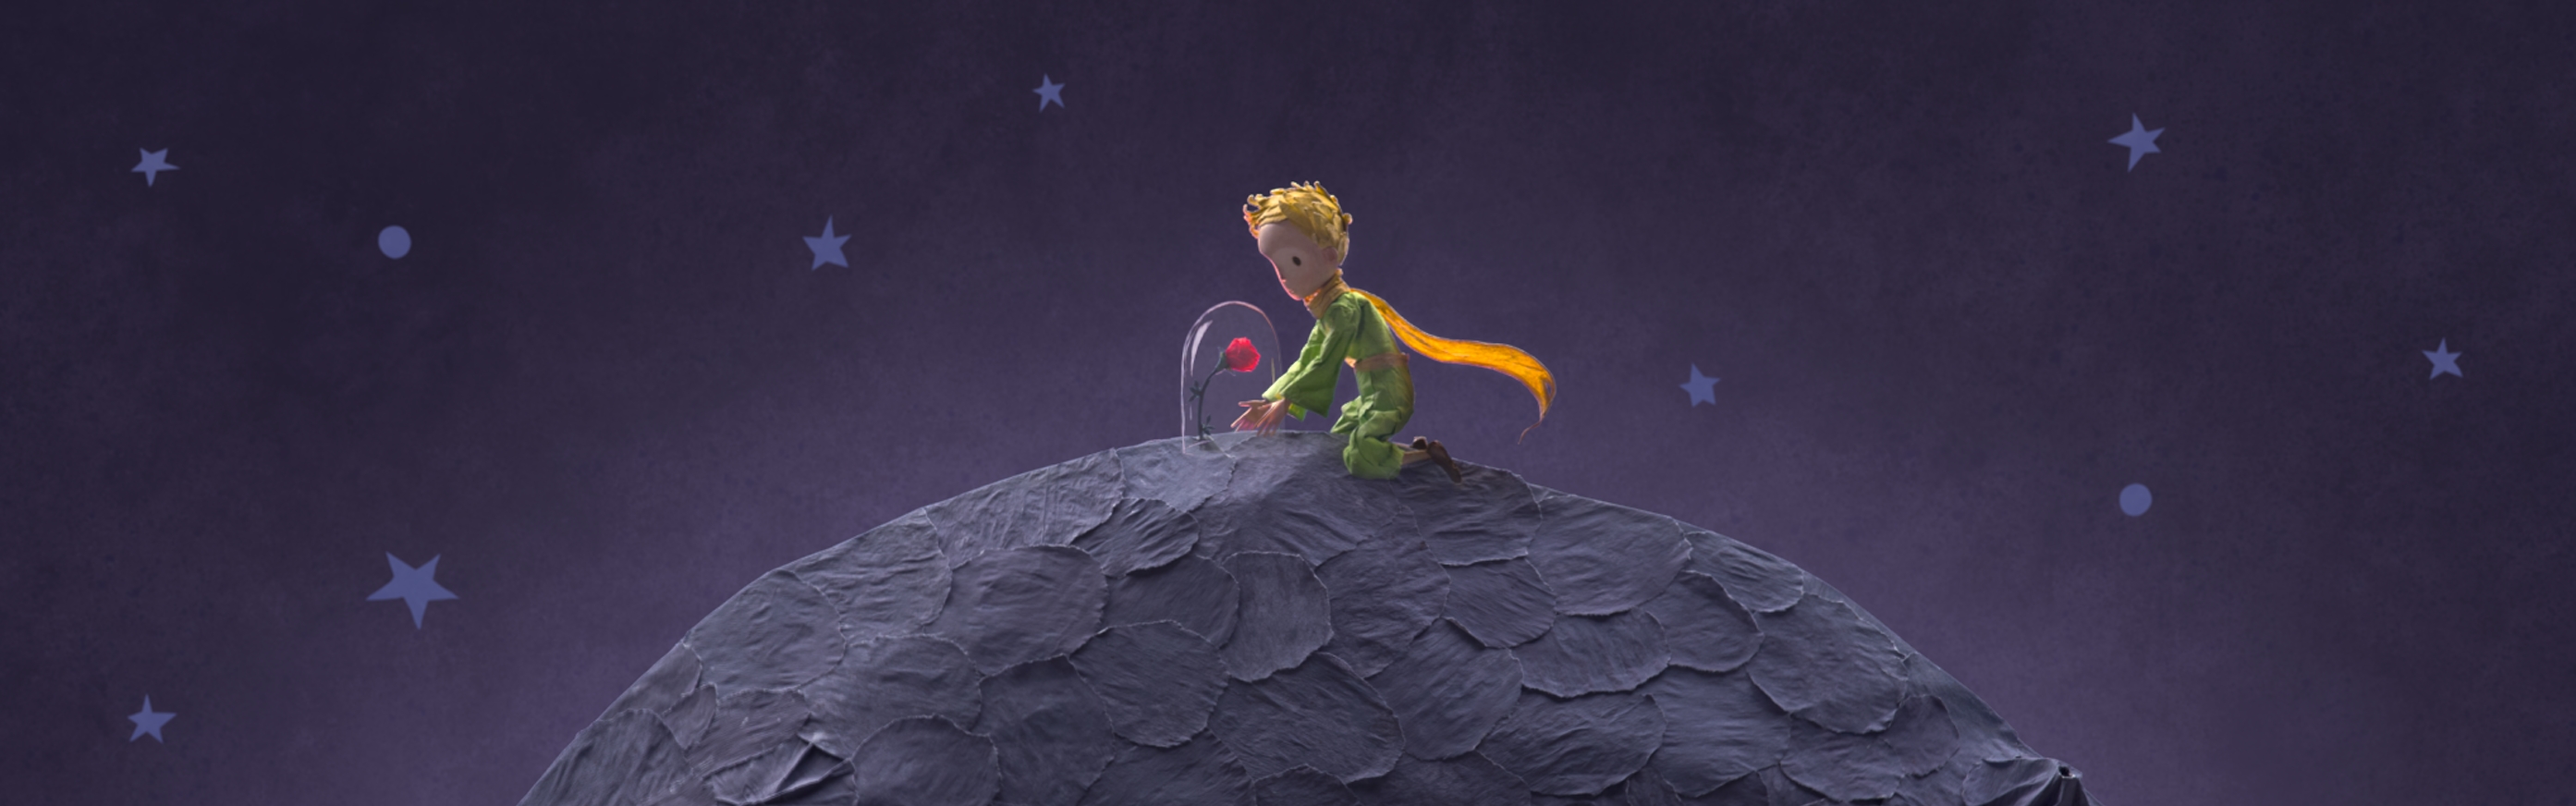 The Little Prince Stop Motion Animation